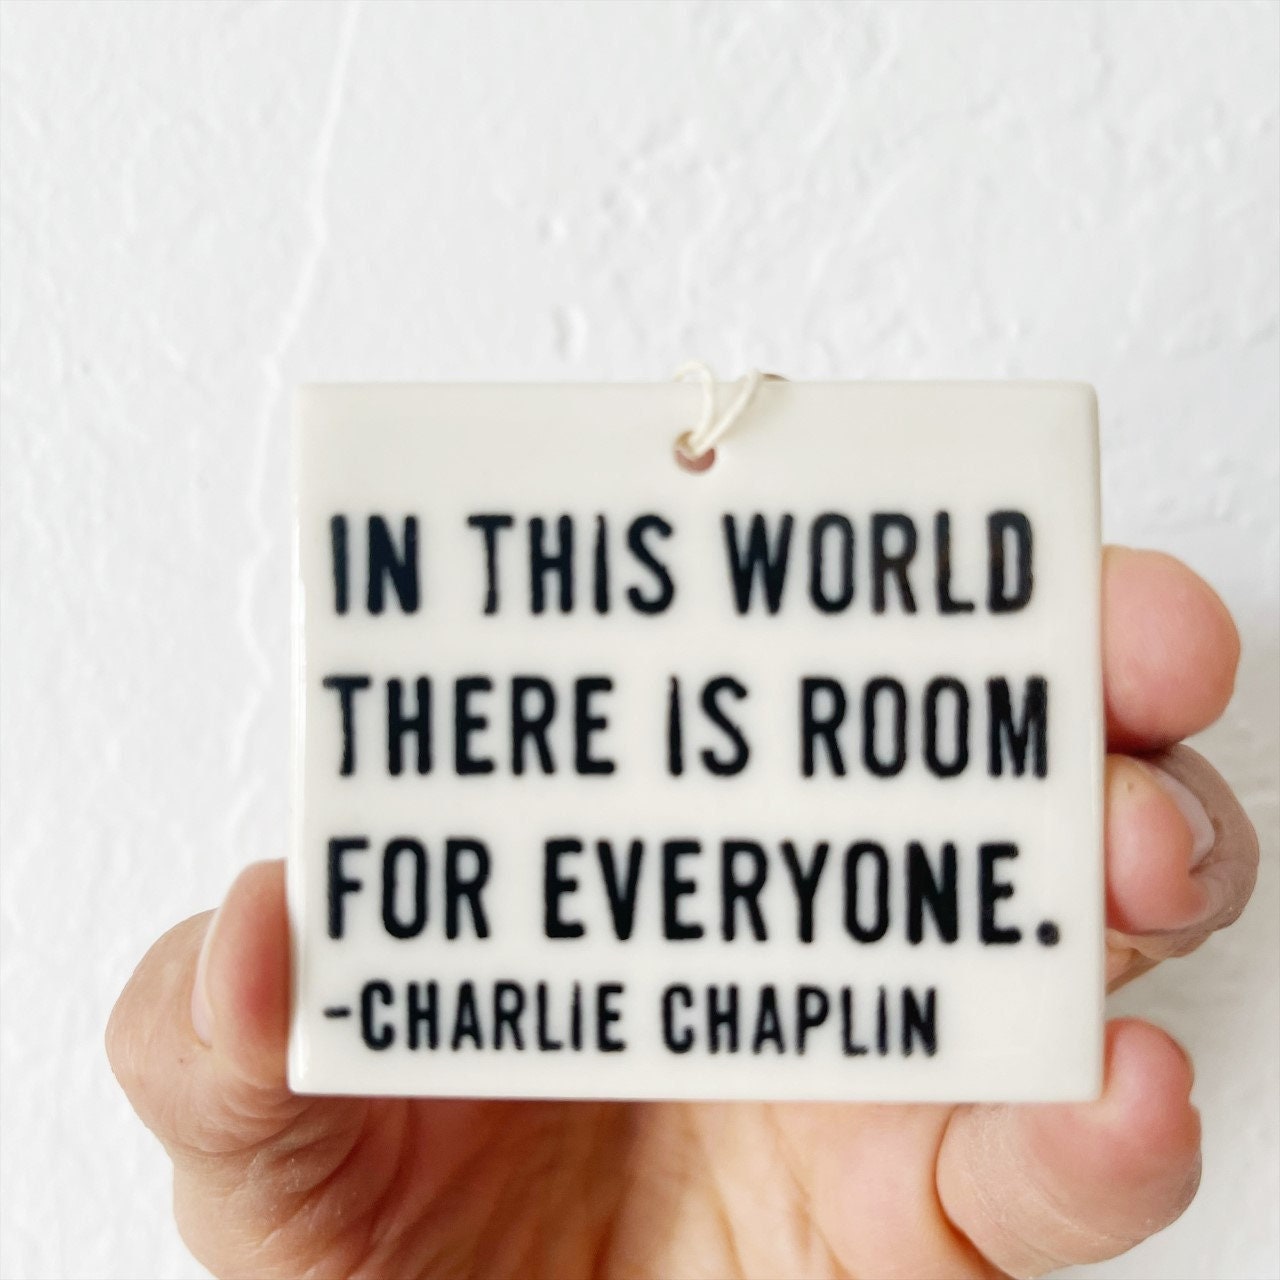 charlie chaplin quote | charles chaplin quote | ceramic wall tag | ceramic wall art | screenprinted ceramics | everyone is welcome